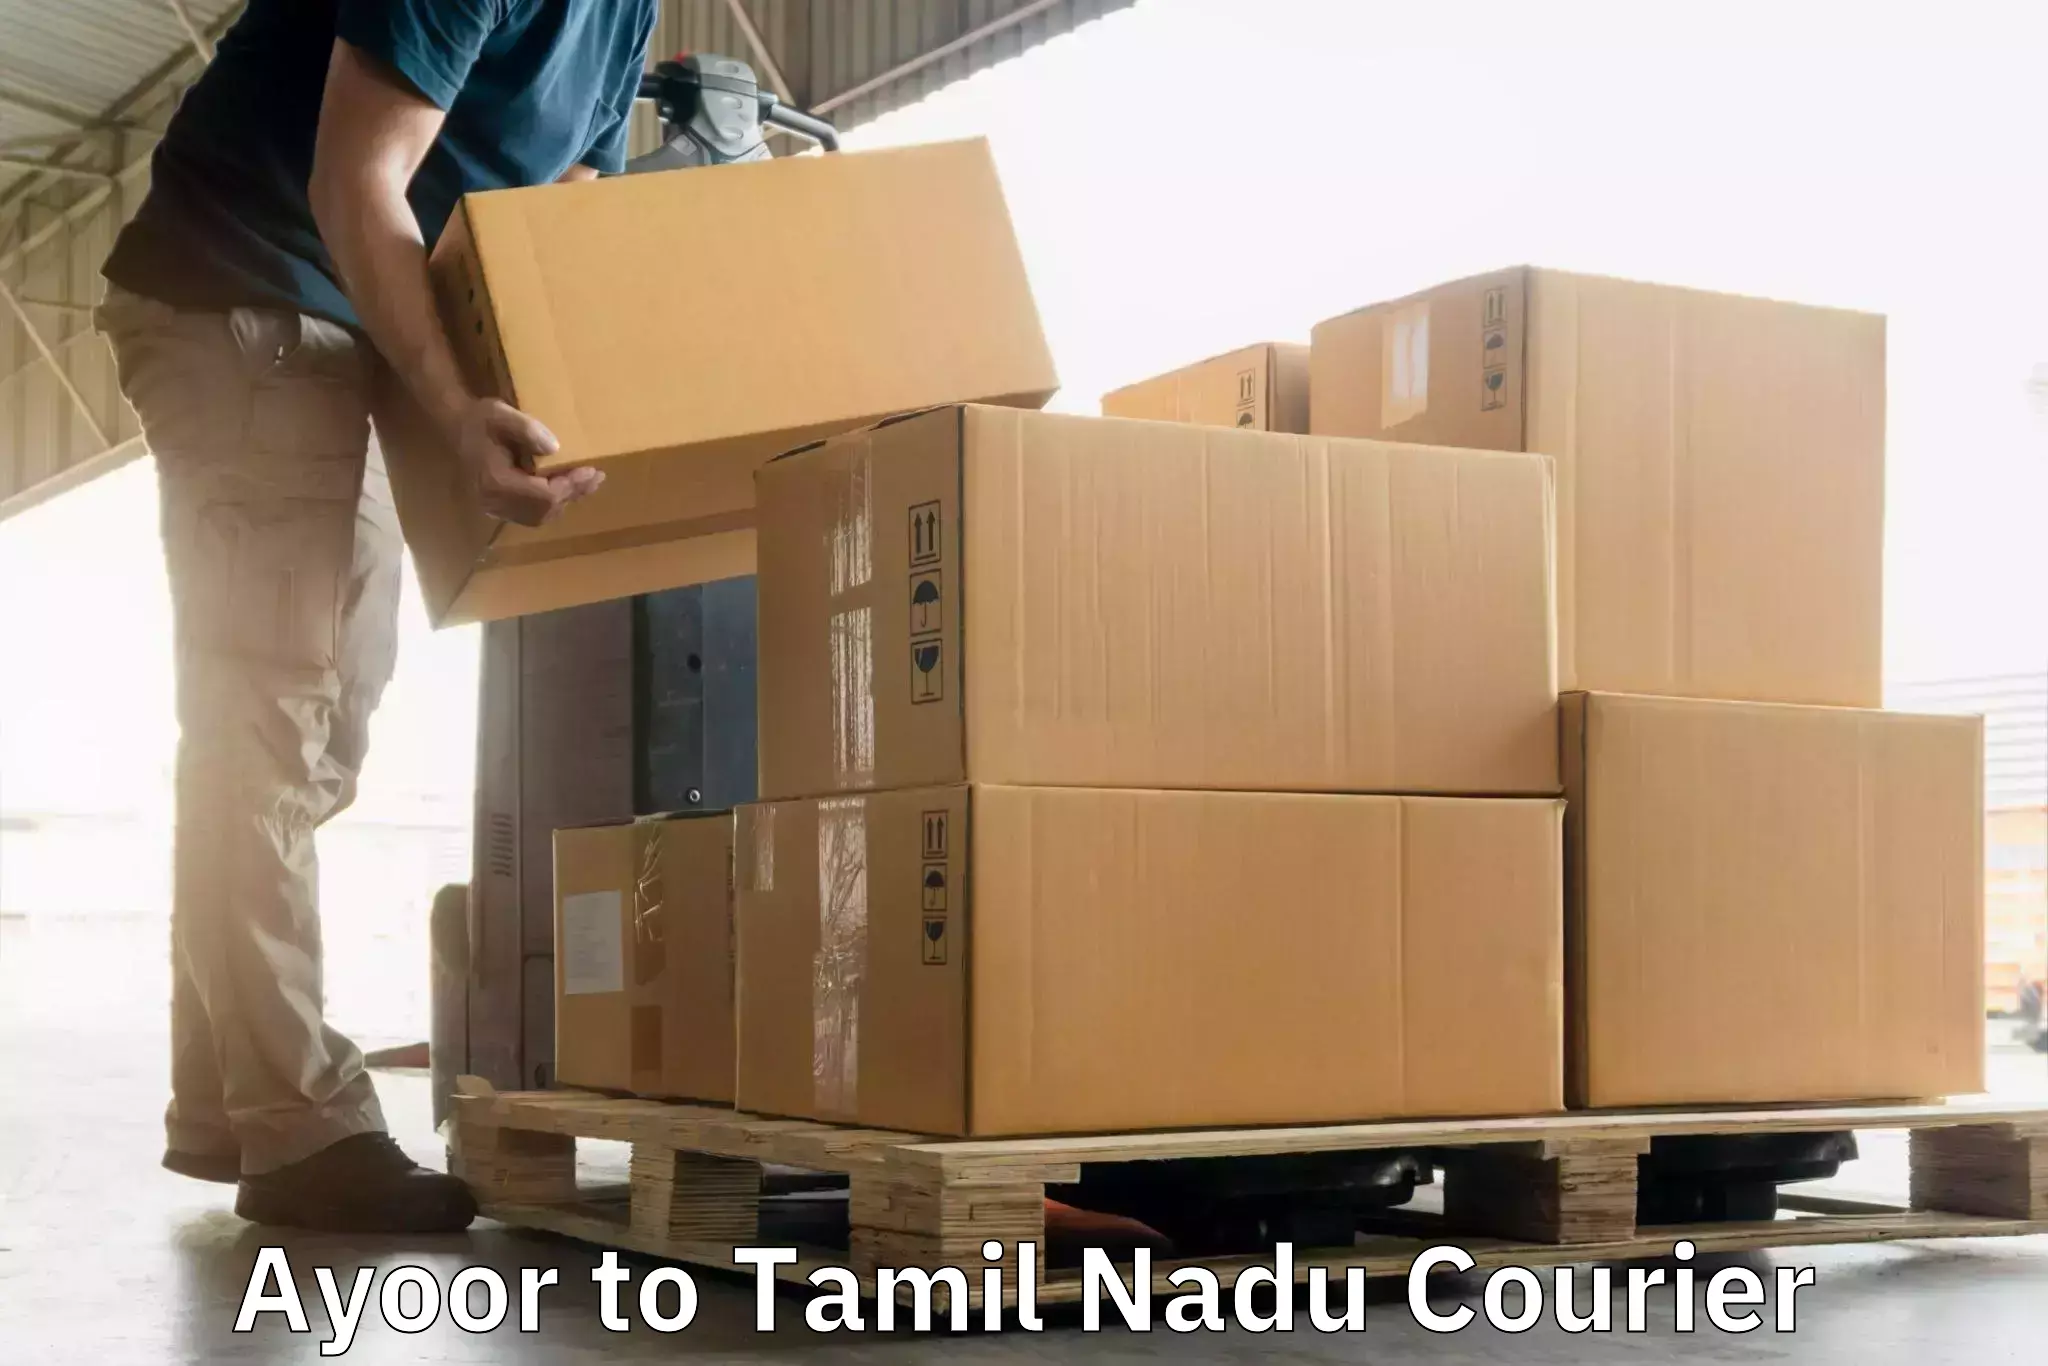 Seamless shipping experience in Ayoor to Tamil Nadu